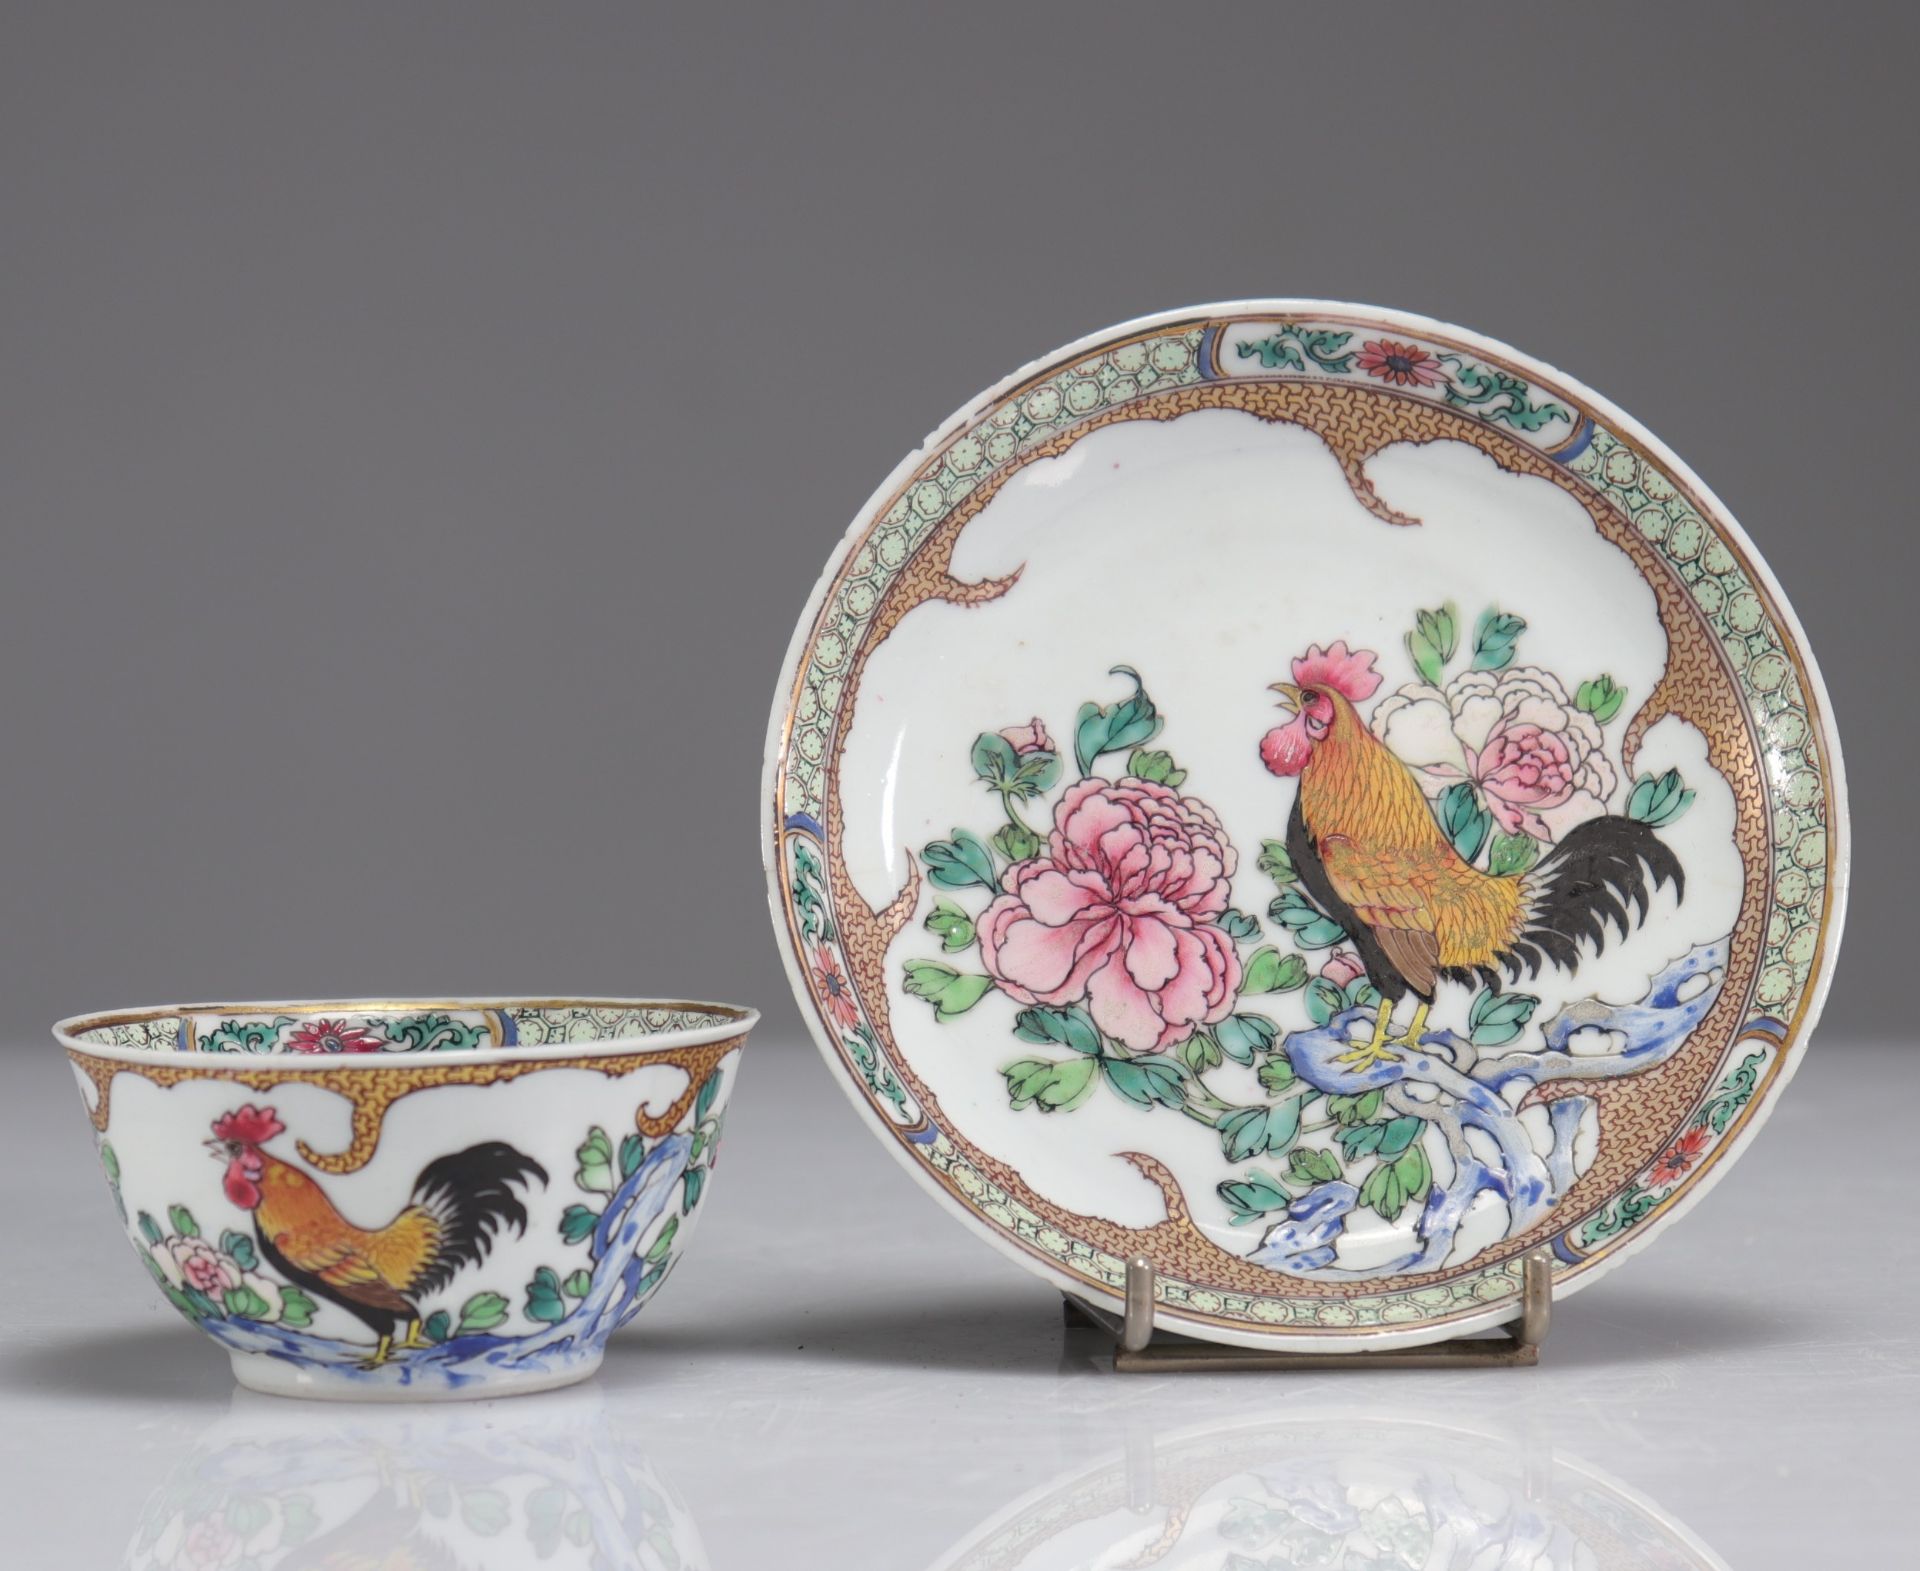 18th century famille rose porcelain bowls and plates (3) - Image 2 of 7